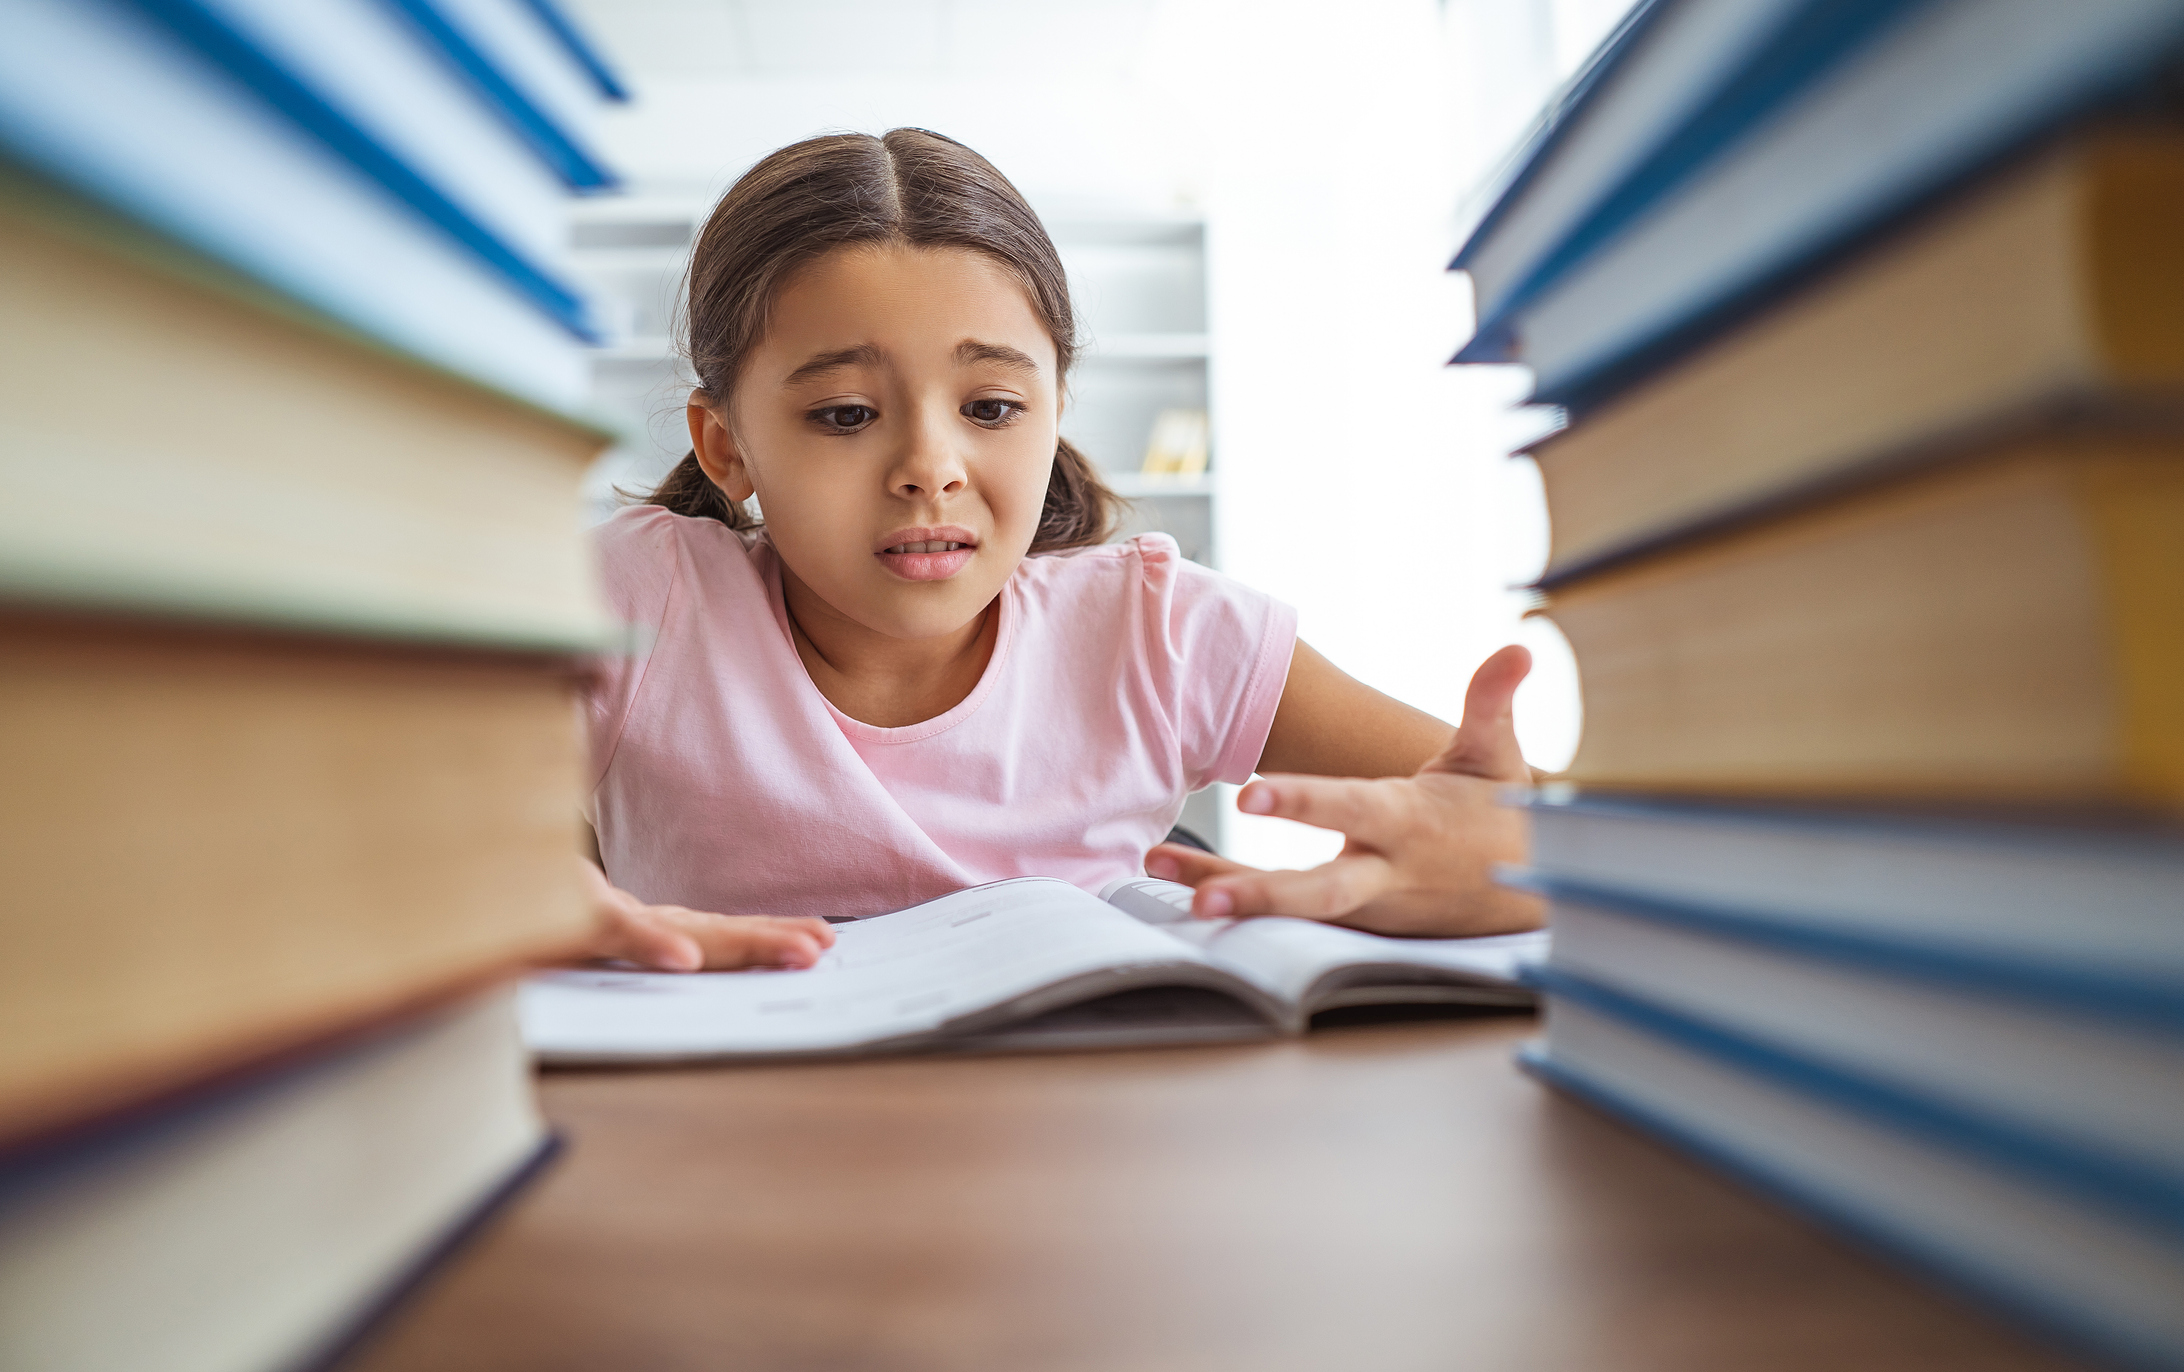 Sitting between two heavy piles of books, an upset girl with light brown hair in pigtails gestures at the worksheet in front of her with frustration and confusion